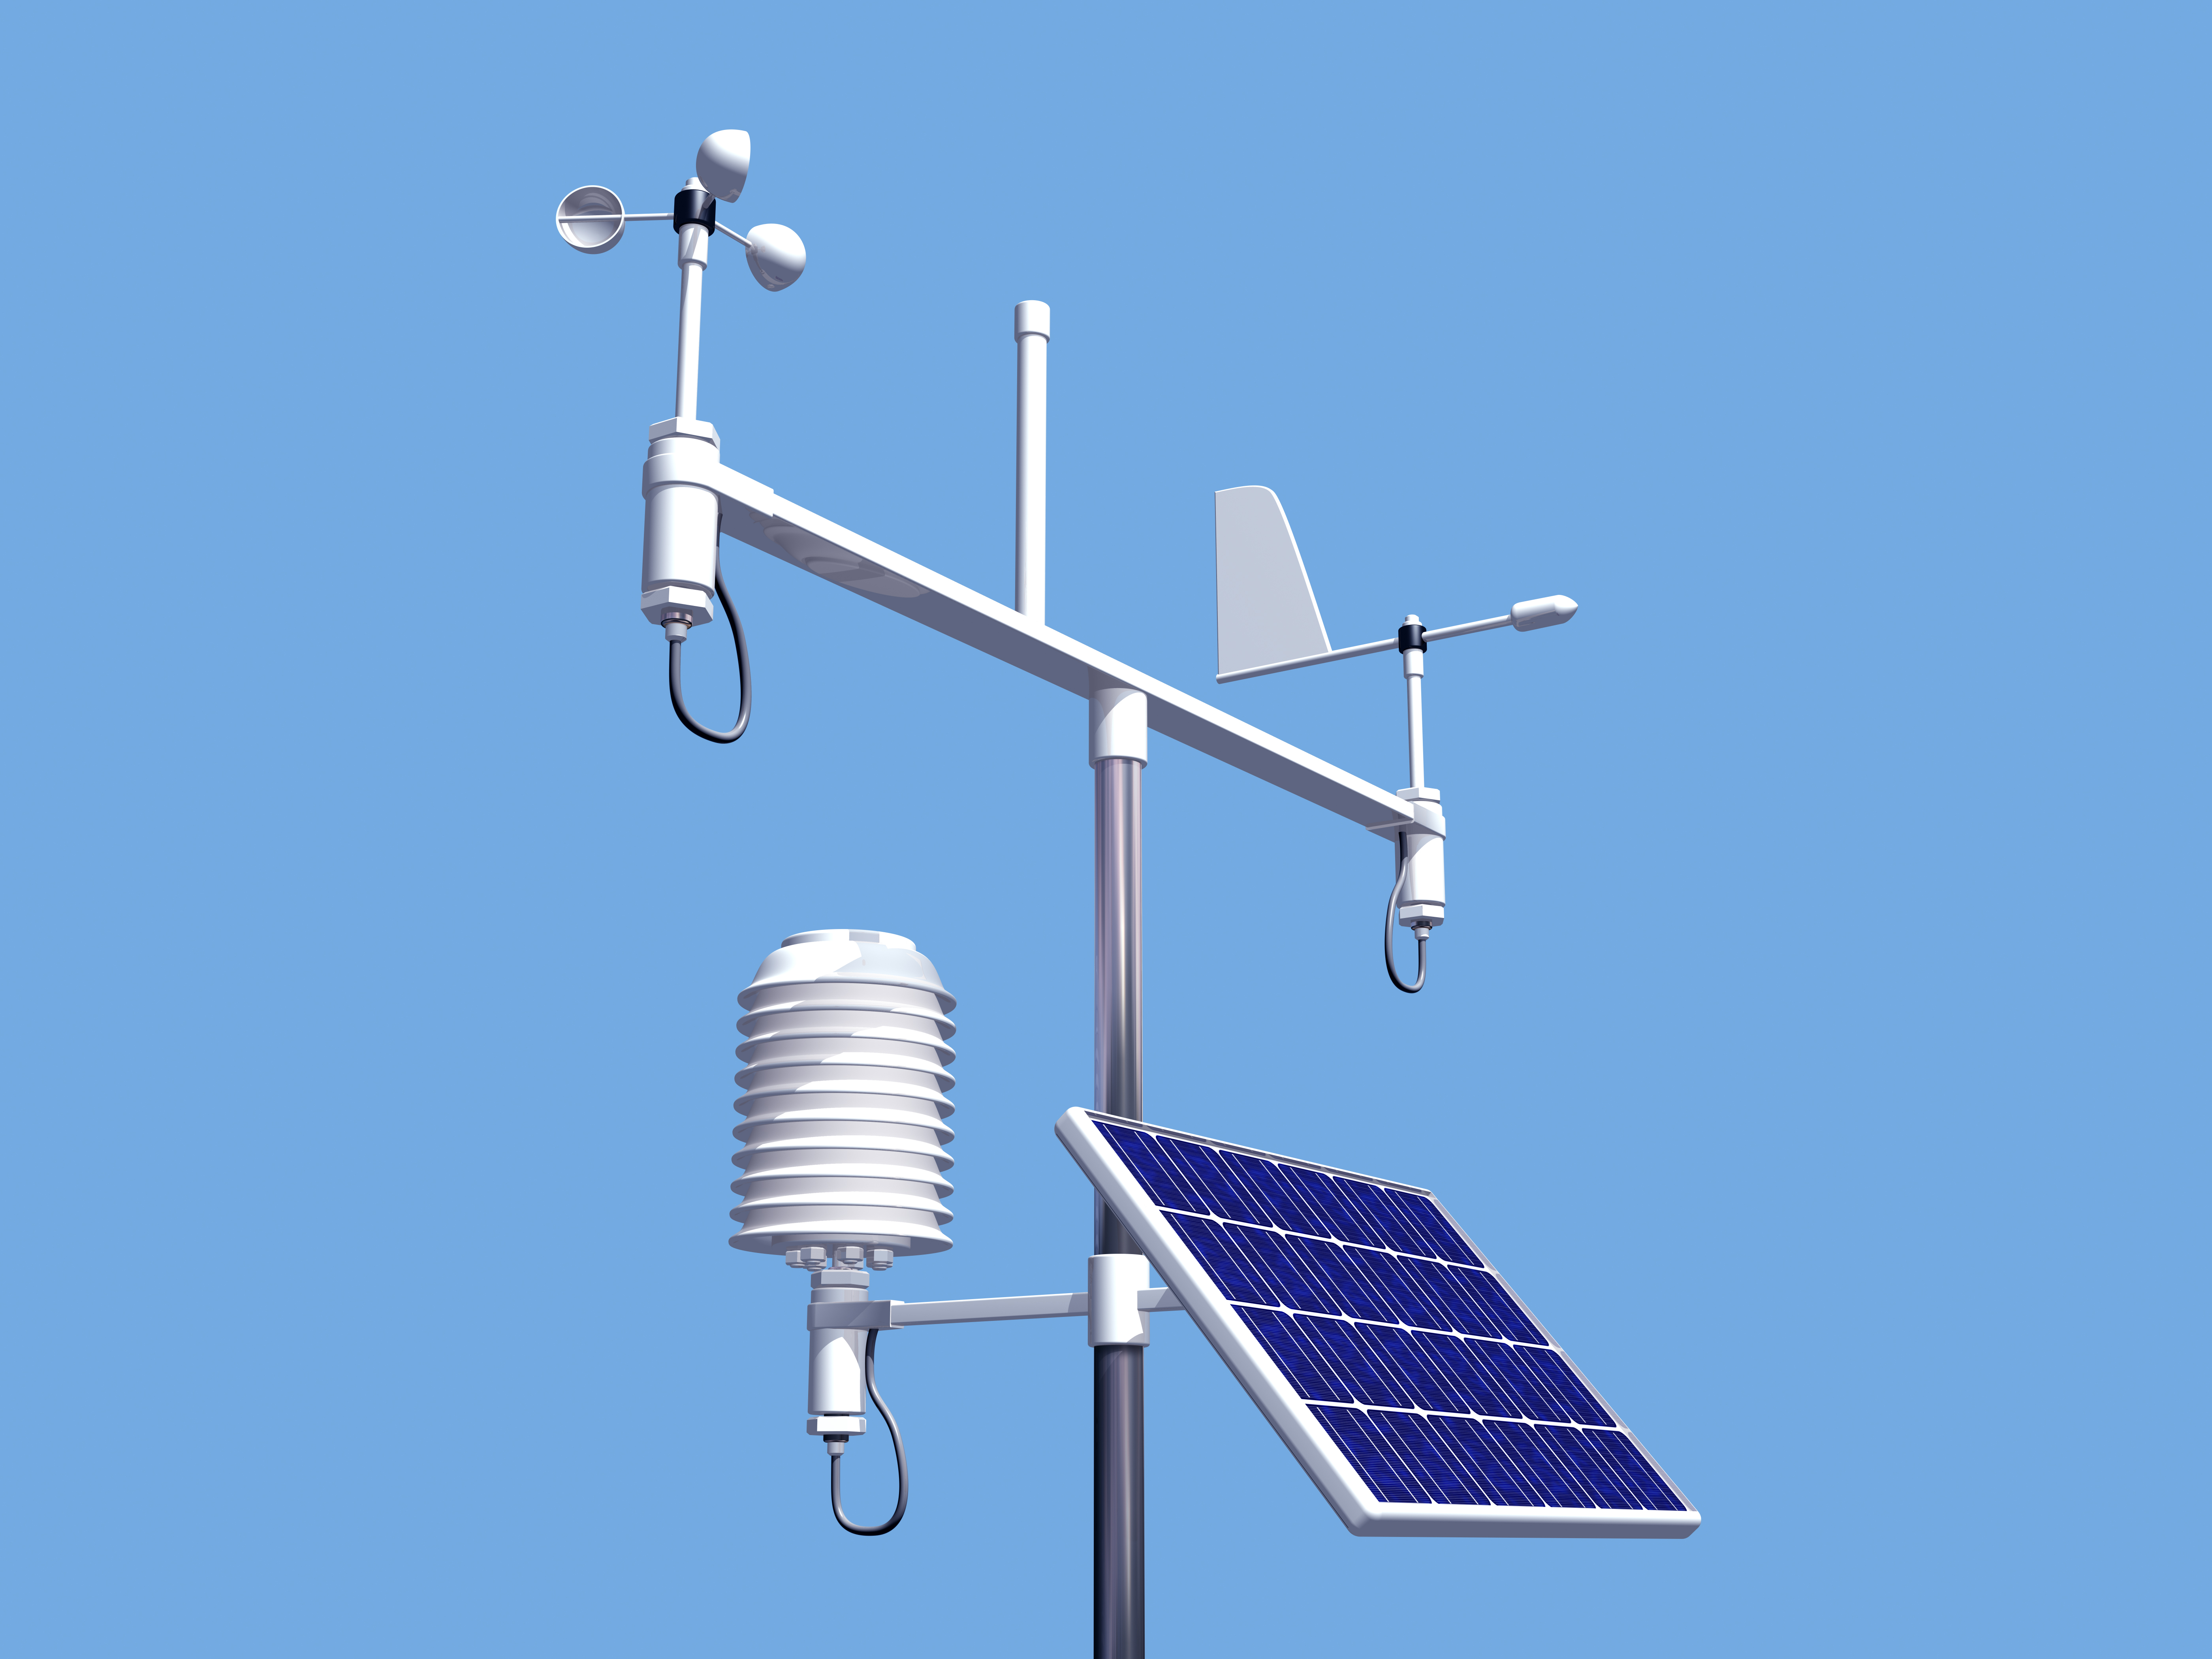 Instruments to measure wind speed and direction